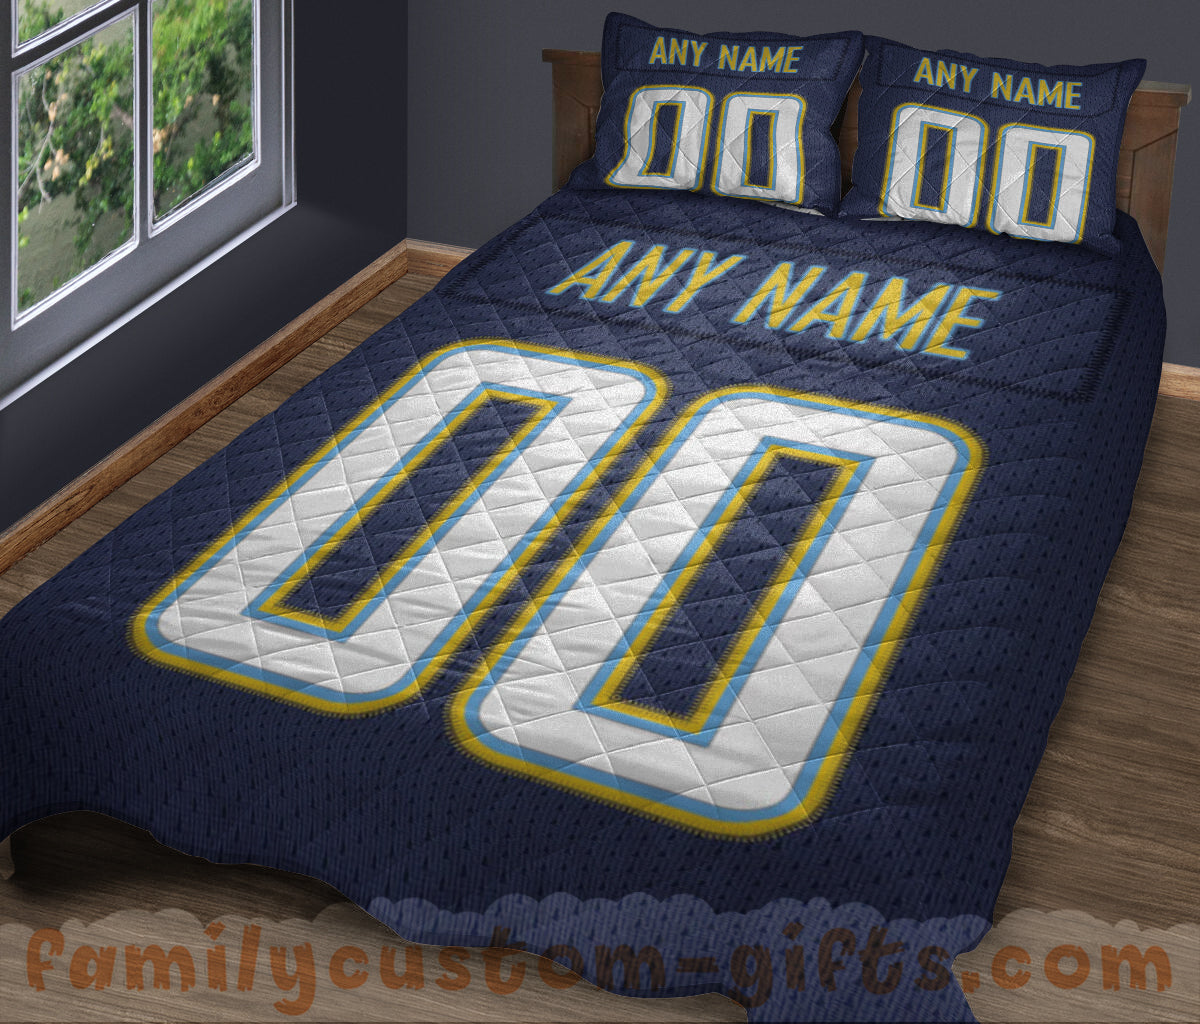 Custom Quilt Sets Los Angeles Jersey Personalized Football Premium Quilt Bedding for Men Women